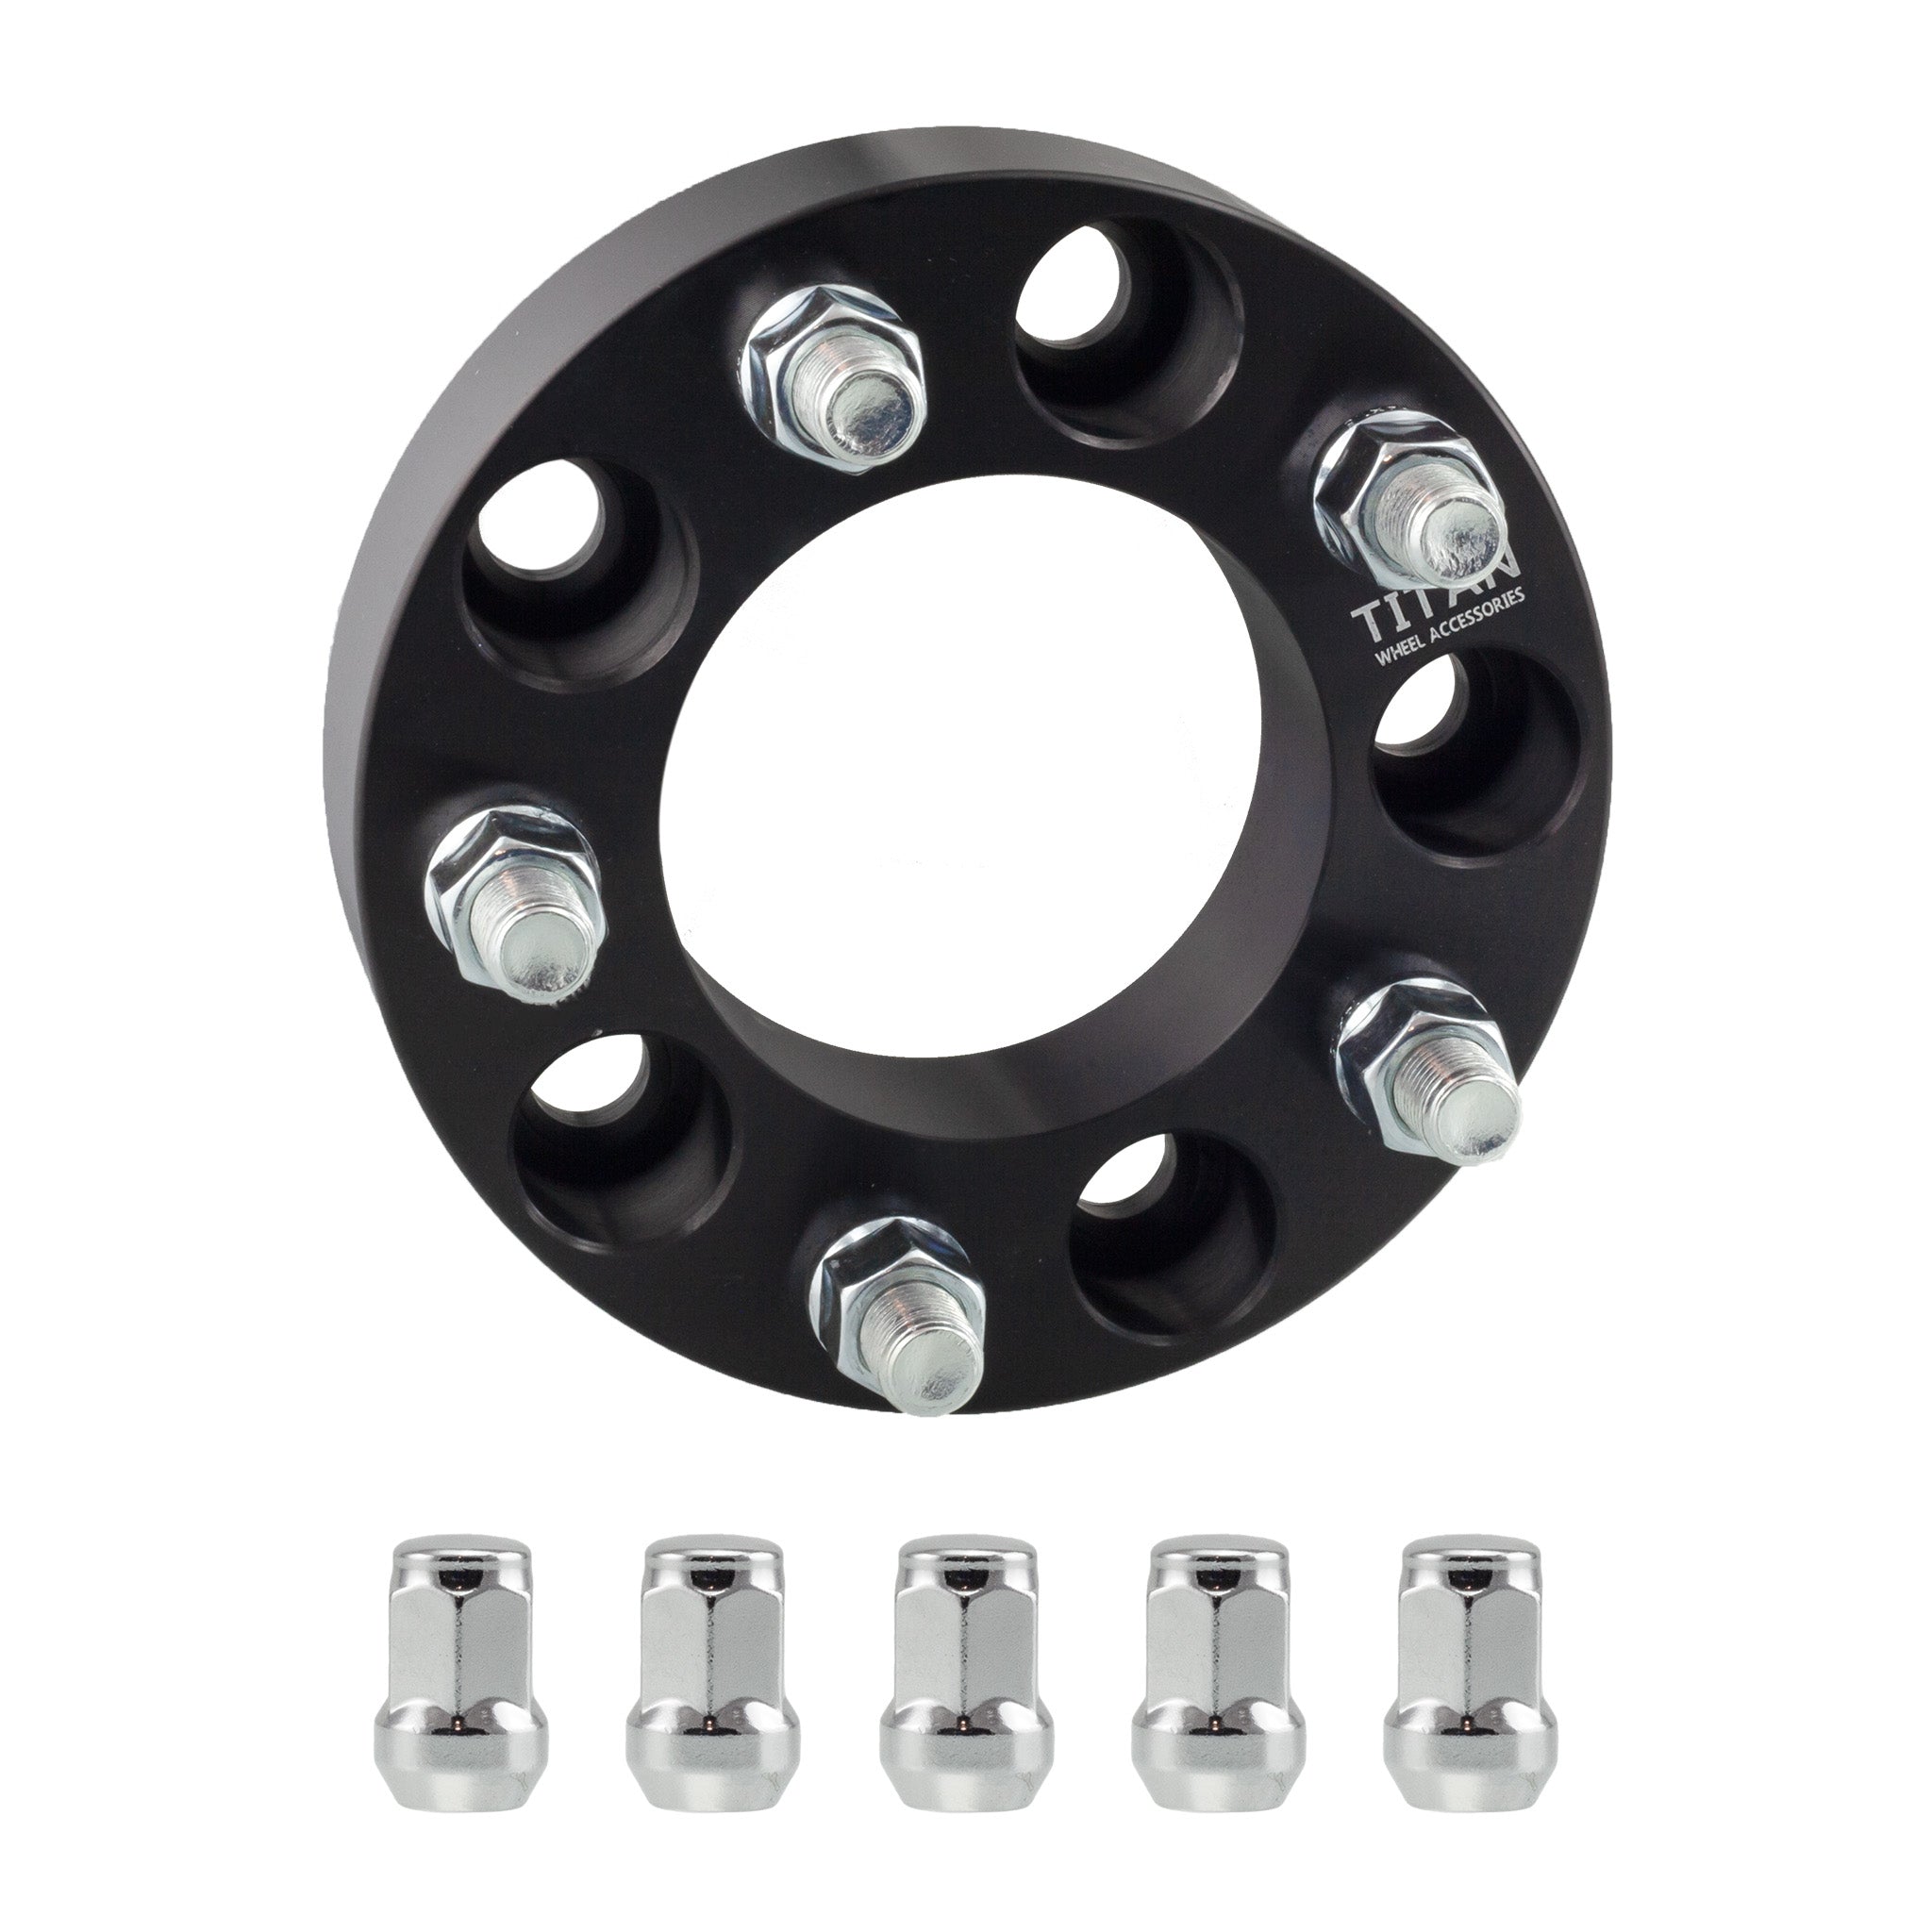 2 Inch Hubcentric Wheel Spacers for Jeep Wrangler TJ YJ XJ | 5x4.5